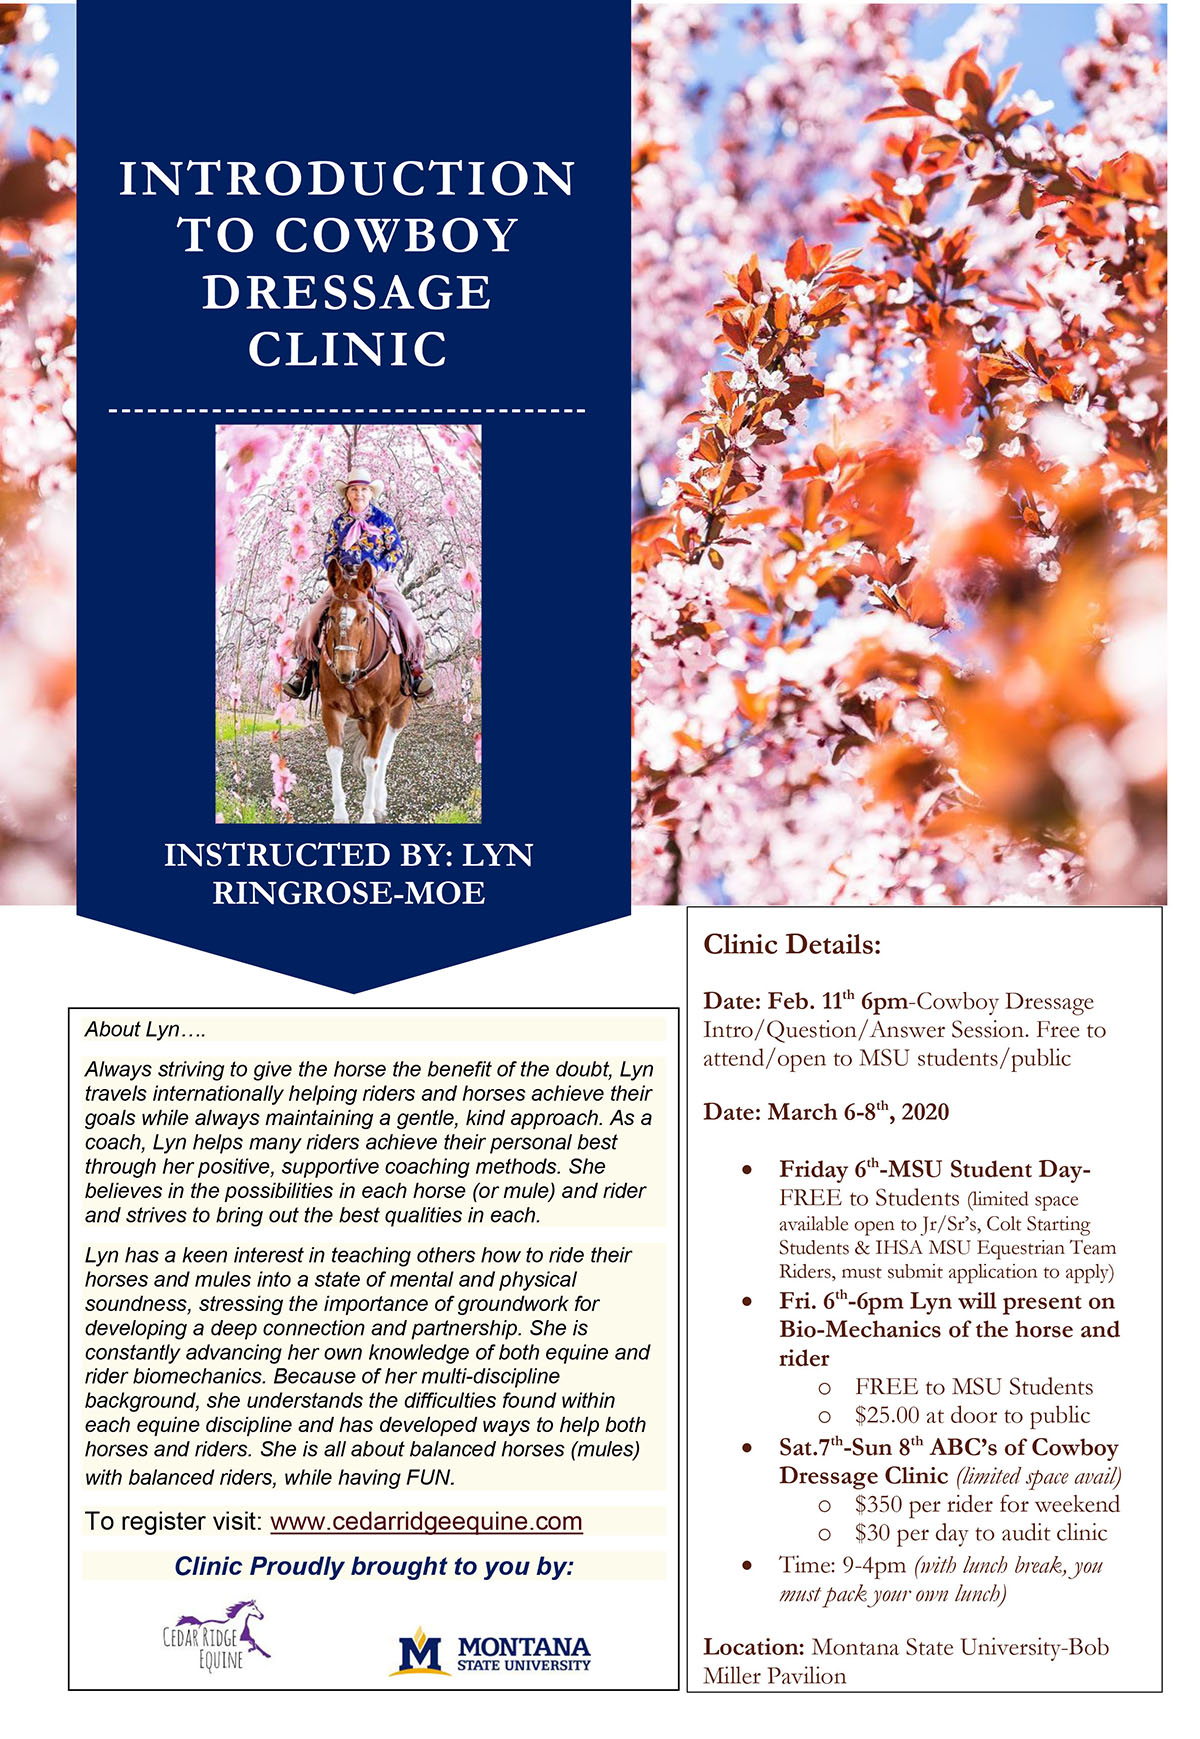 Cowboy Dressage Clinic Coming March 6-8, 2020